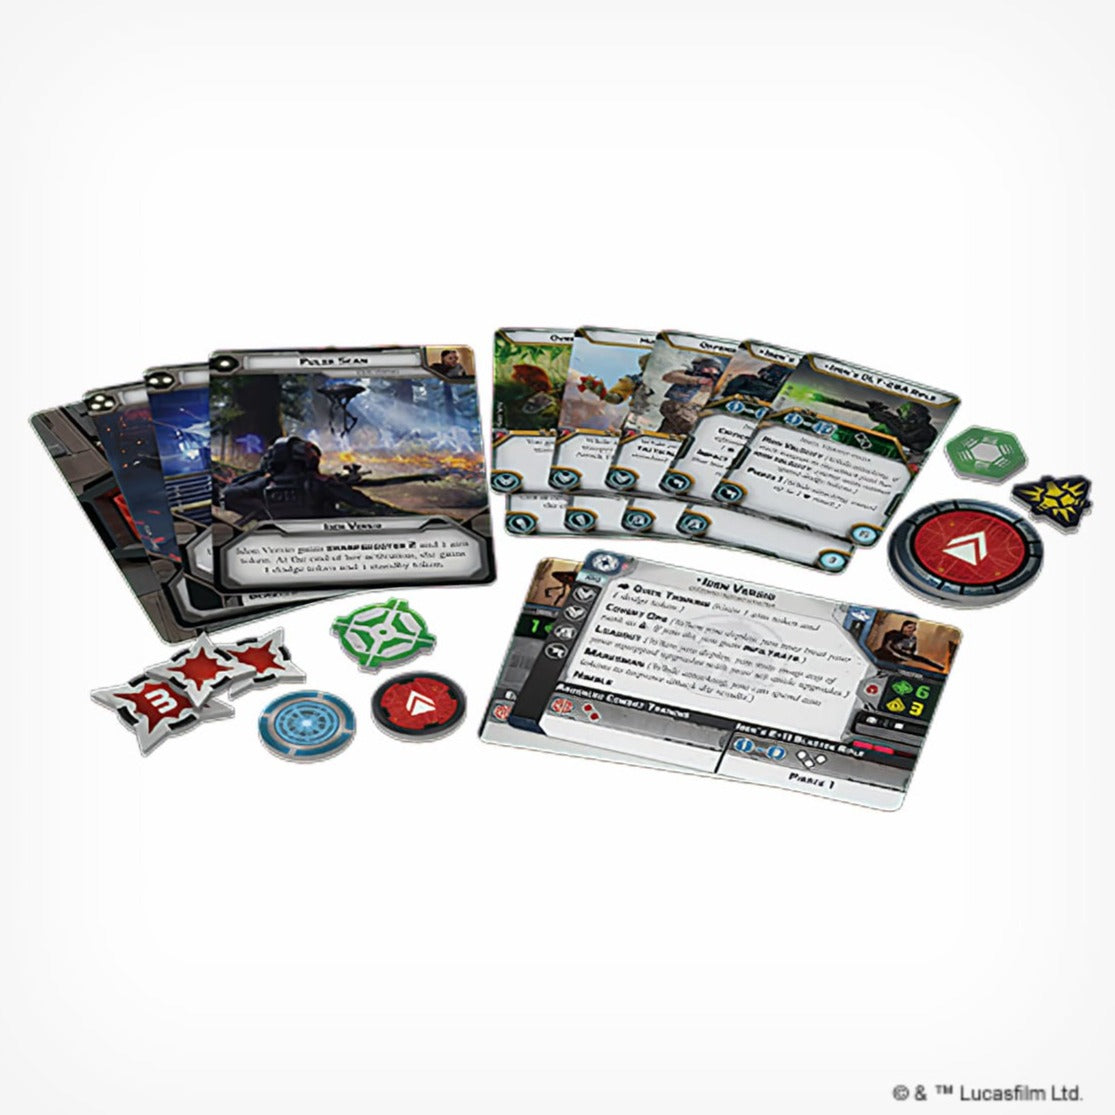 Star Wars Legion: Iden Versio and ID10 Commander Expansion - Loaded Dice